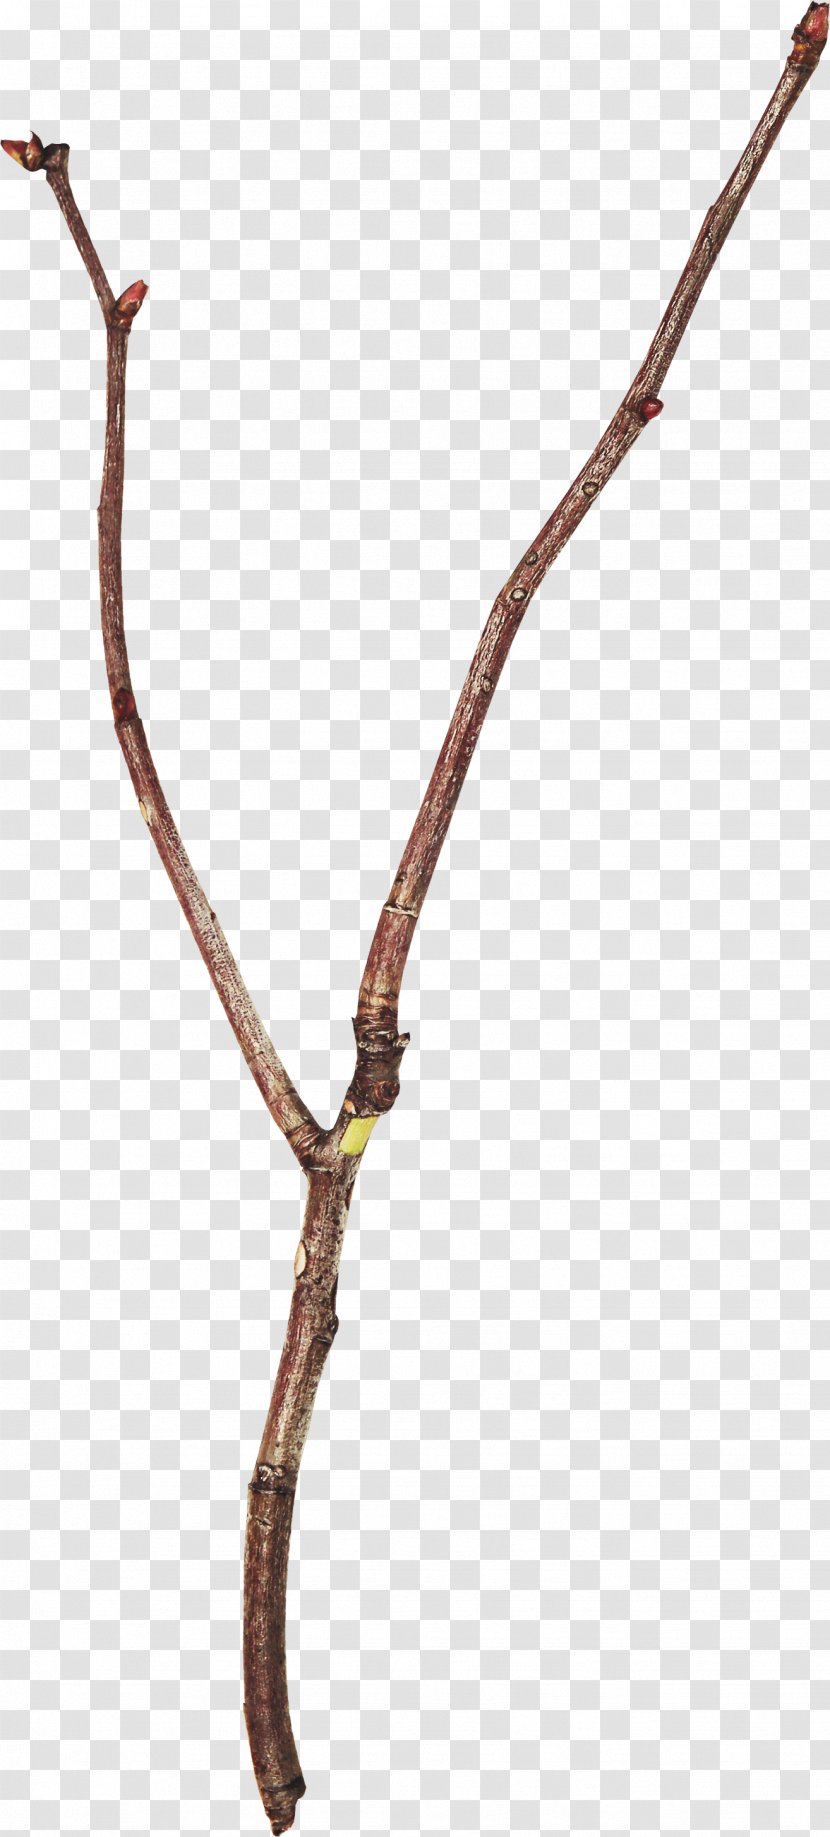 Twig Branch Leaf Tree Clip Art - Stock Photography Transparent PNG